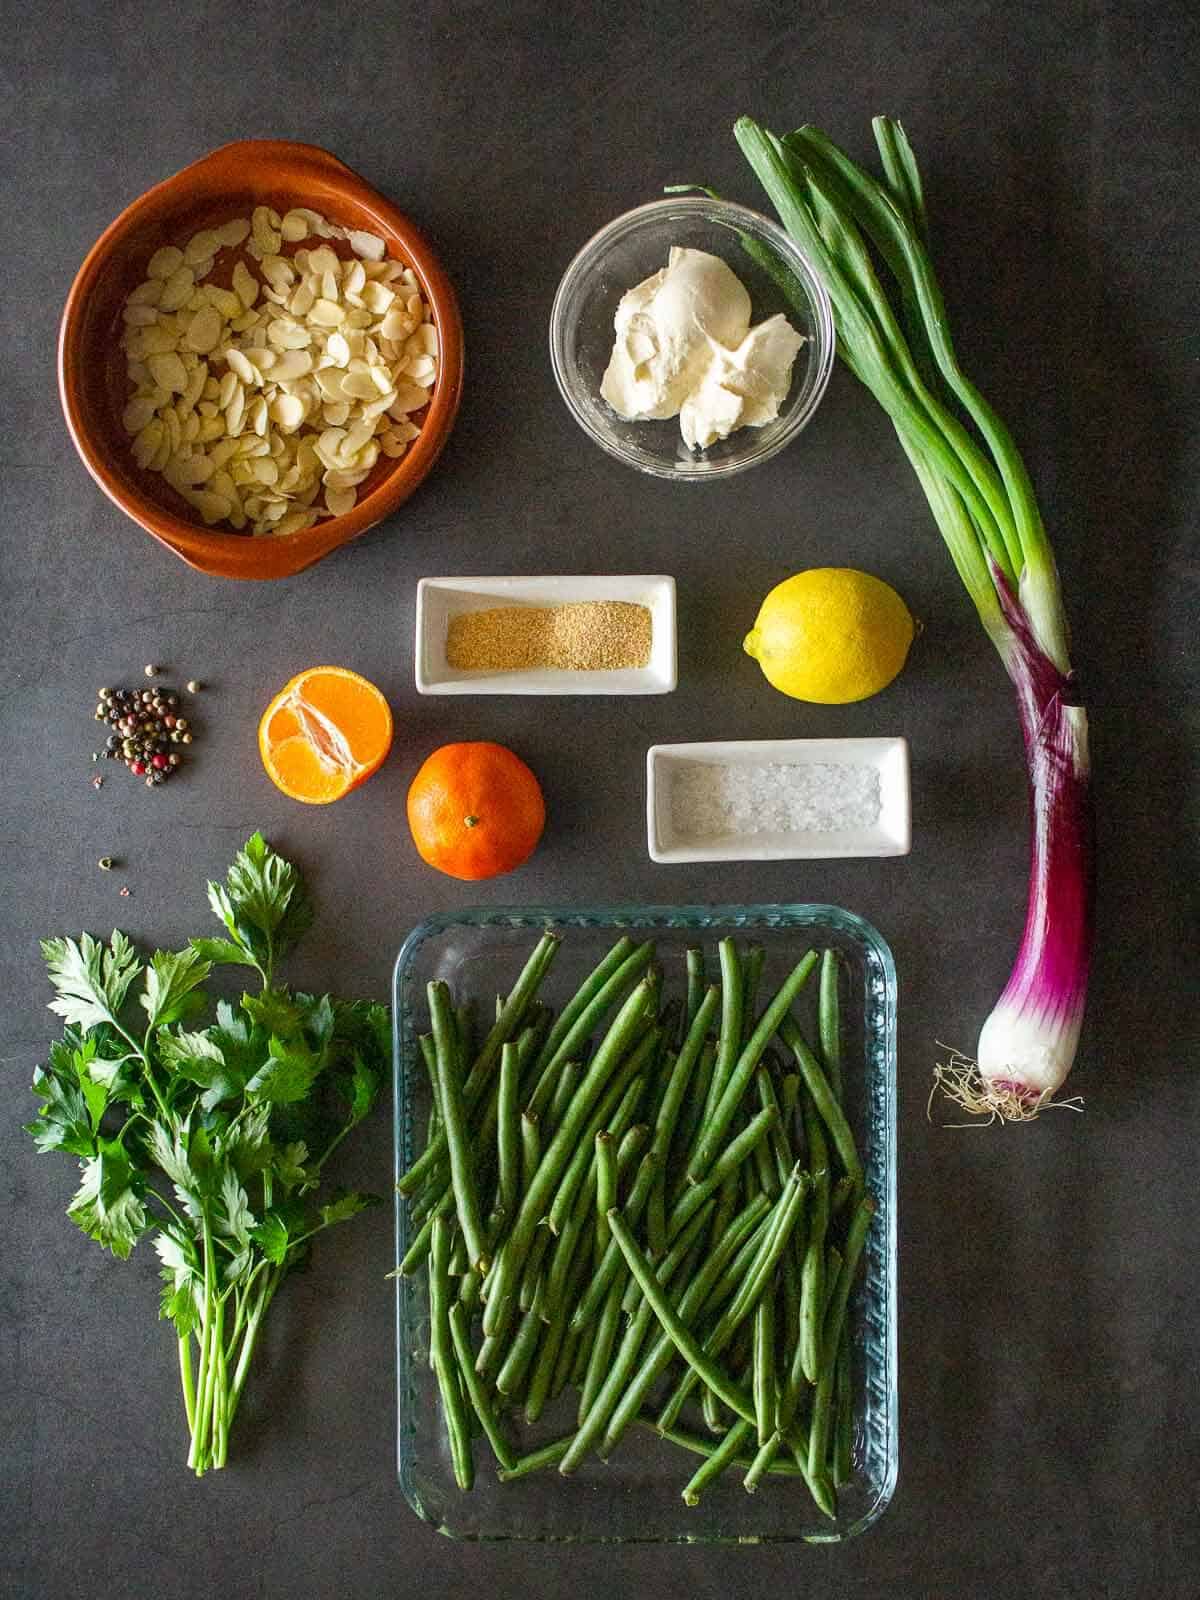 Green Beans With Almonds Ingredients